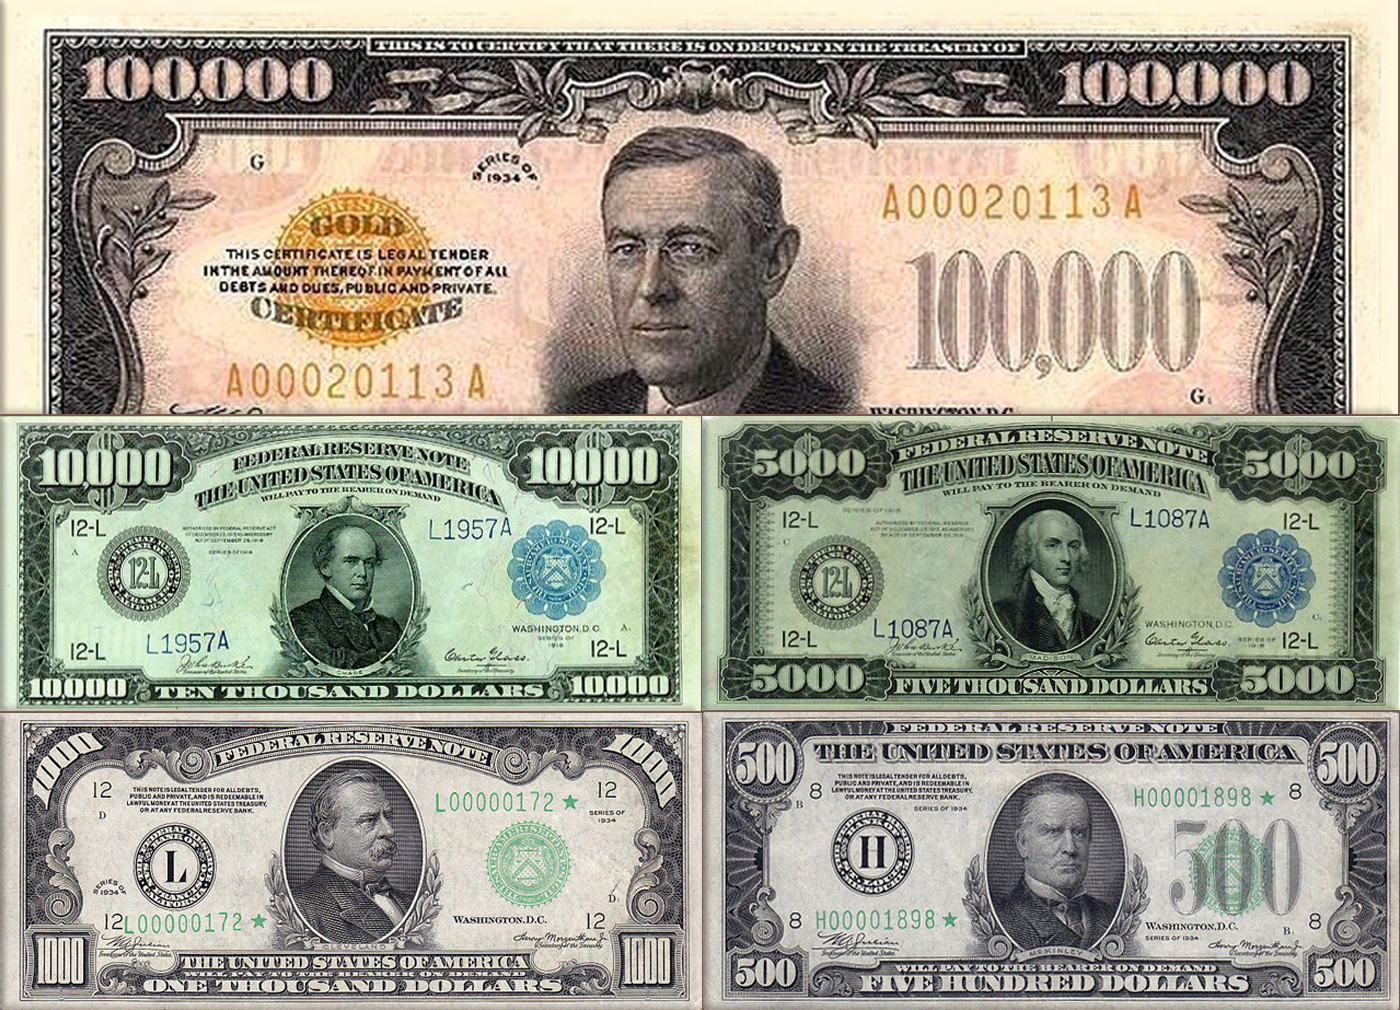 The United States $500, $1,000, $5,000 and $10,000 bills are officially withdrawn from circulation